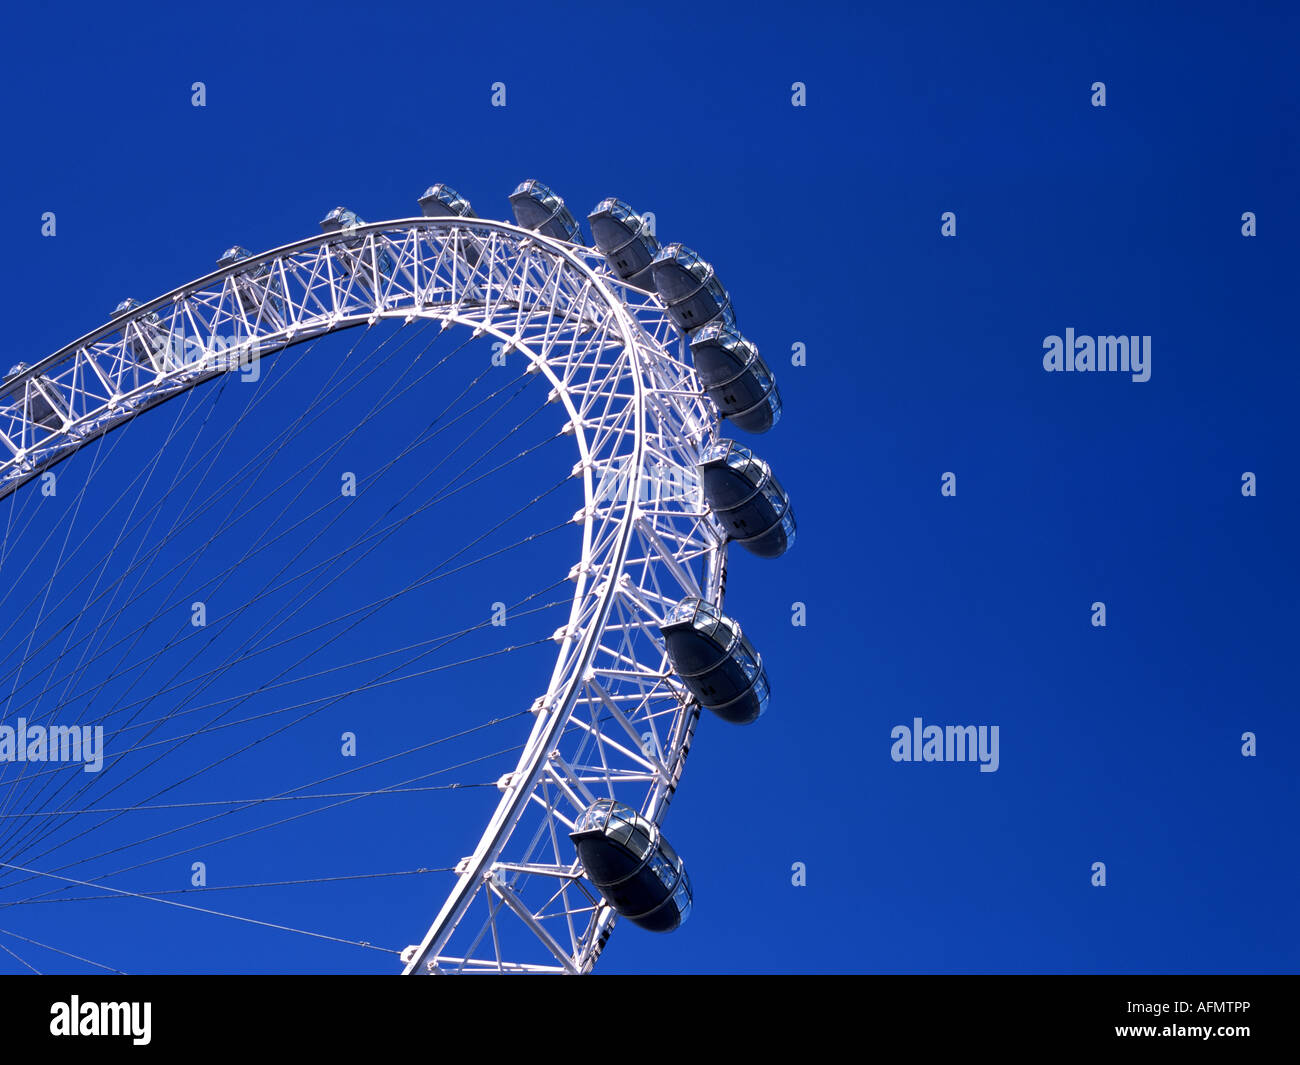 London Eye, Millennium Wheel, on South Bank of the River Thames Stock Photo